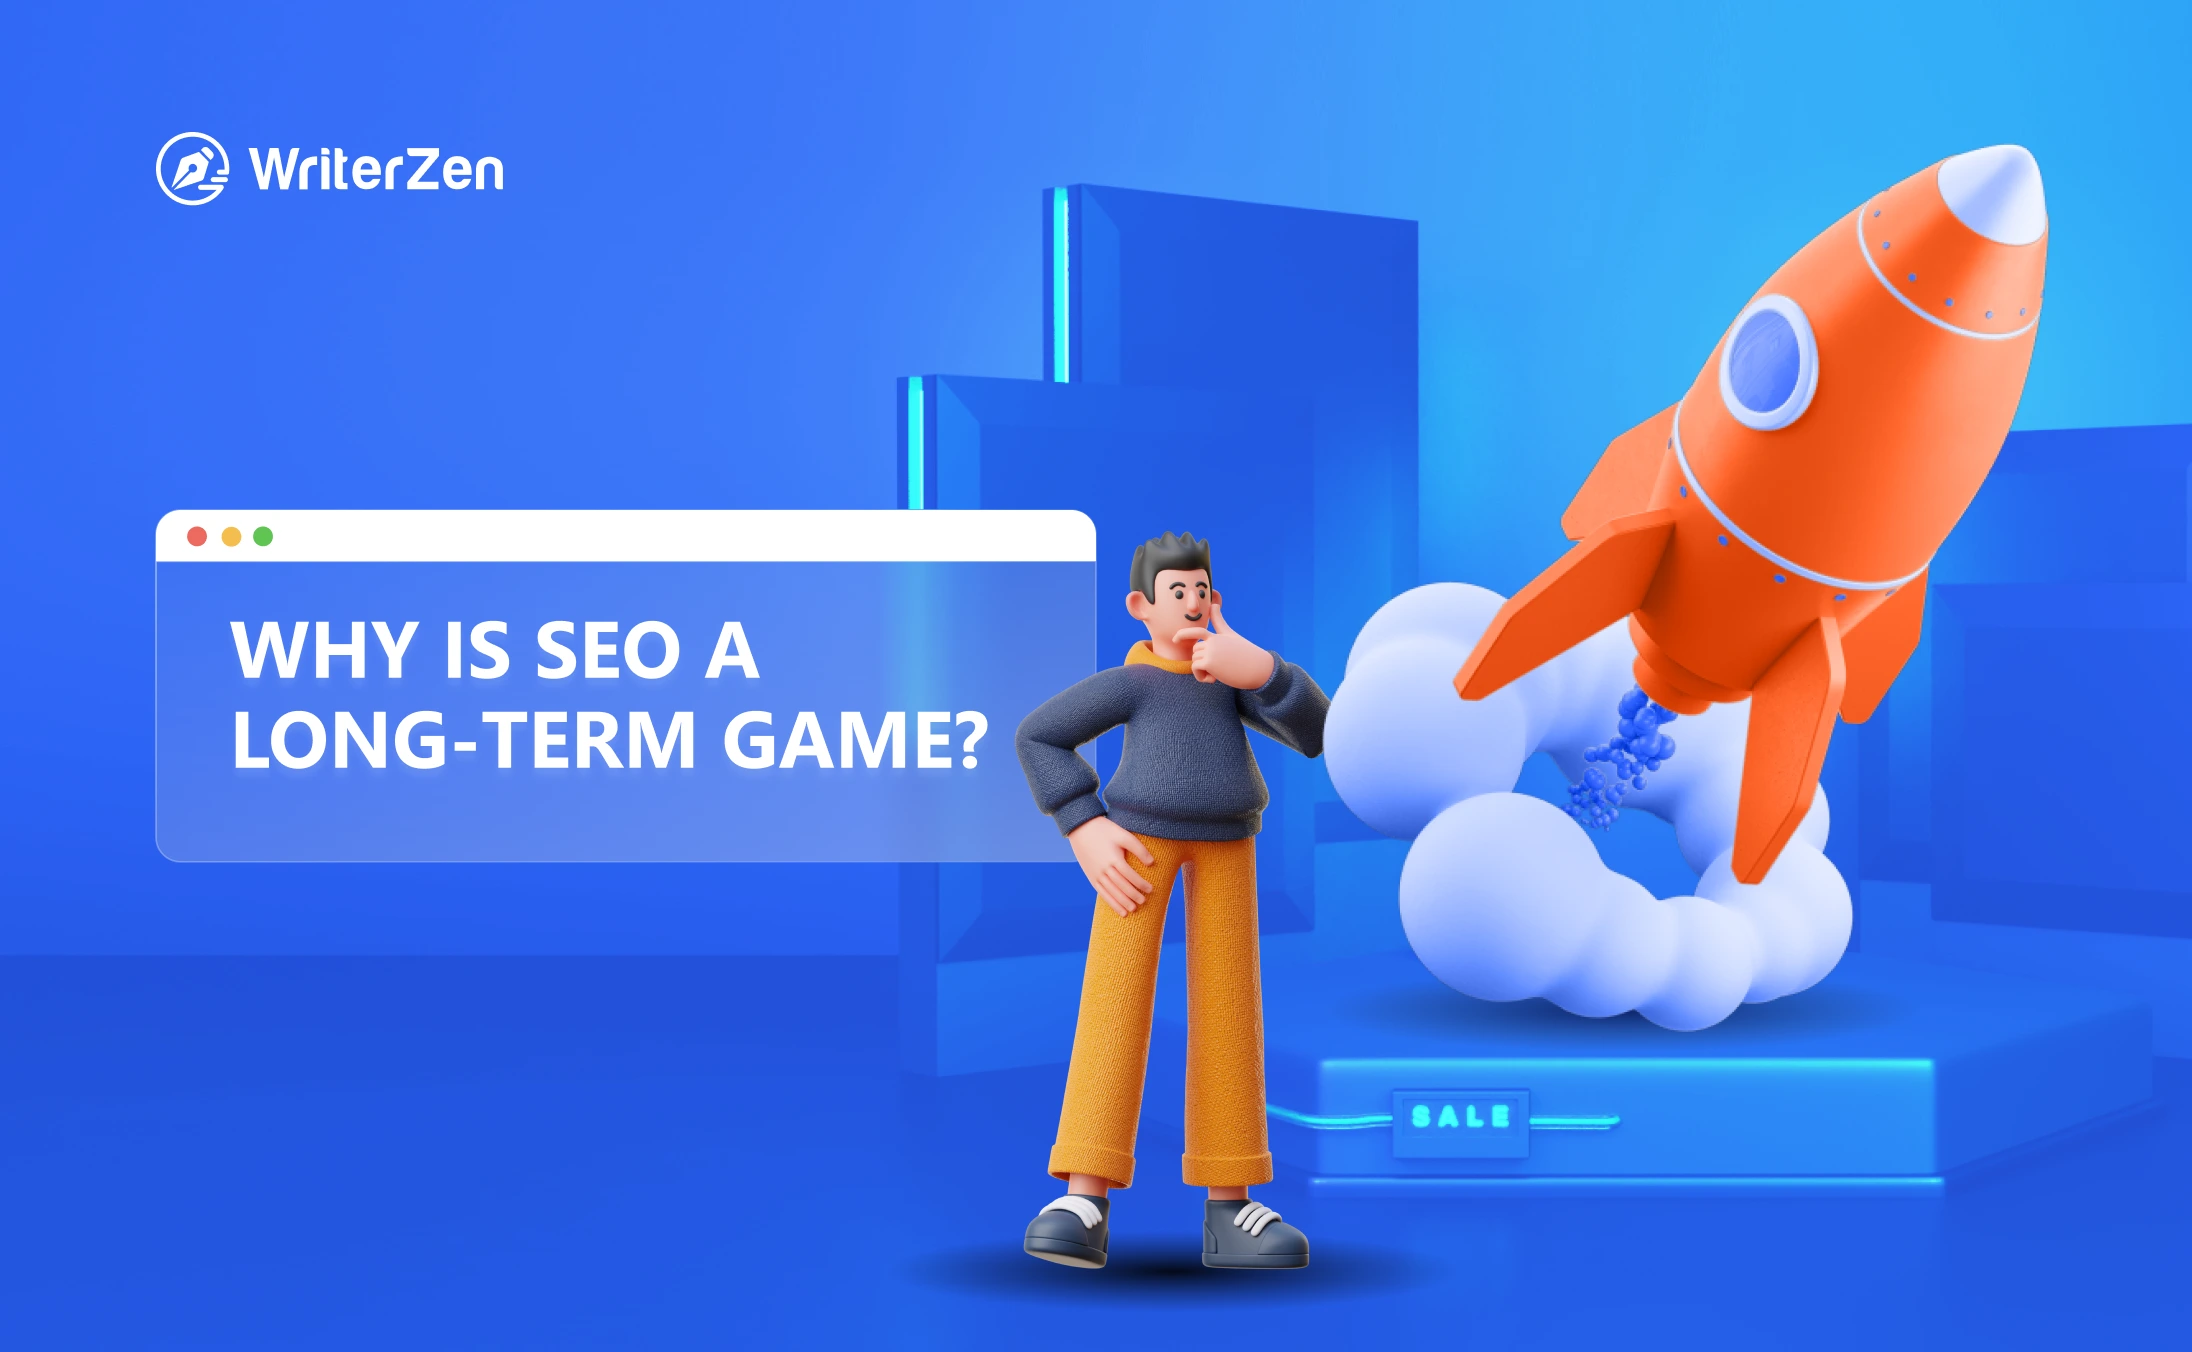 Why Is SEO a Long-Term Game?